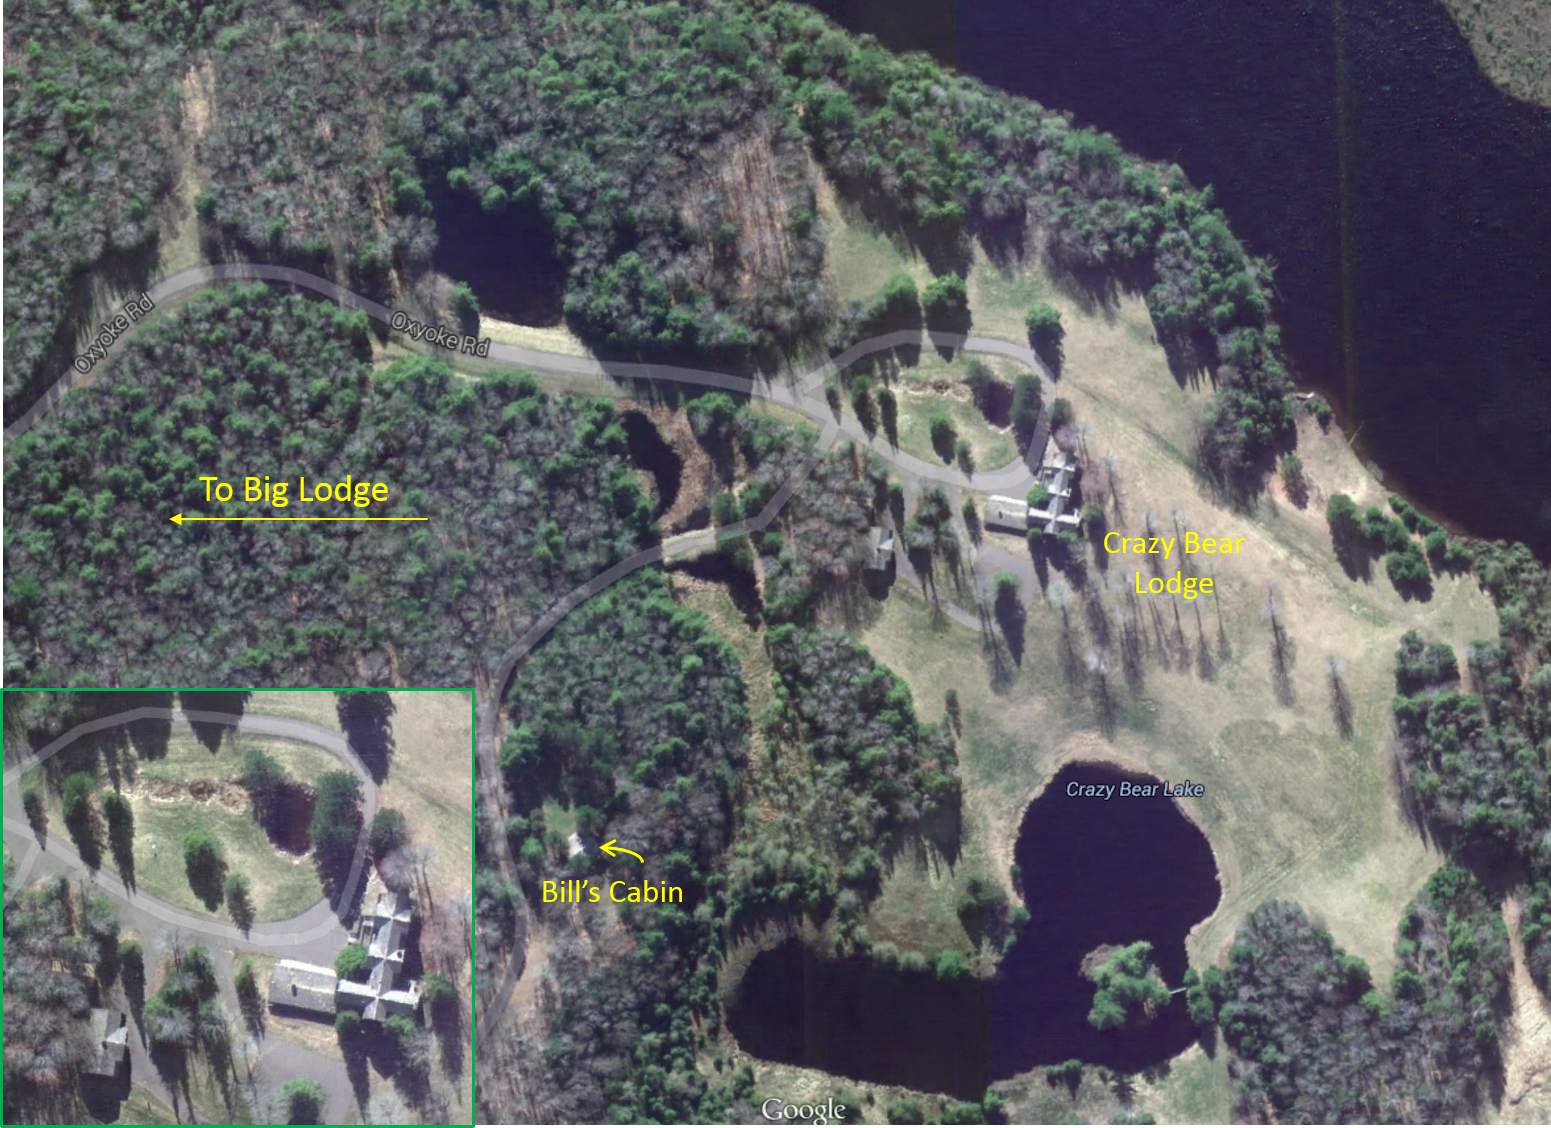 Updated 5/27/2014: Crazy Bear Lodge and surrounding area, 2014. The top of the picture is West. Bill's Cabin is estimated to be at about 46°18'57.07" N  89°16'47.24" W. 